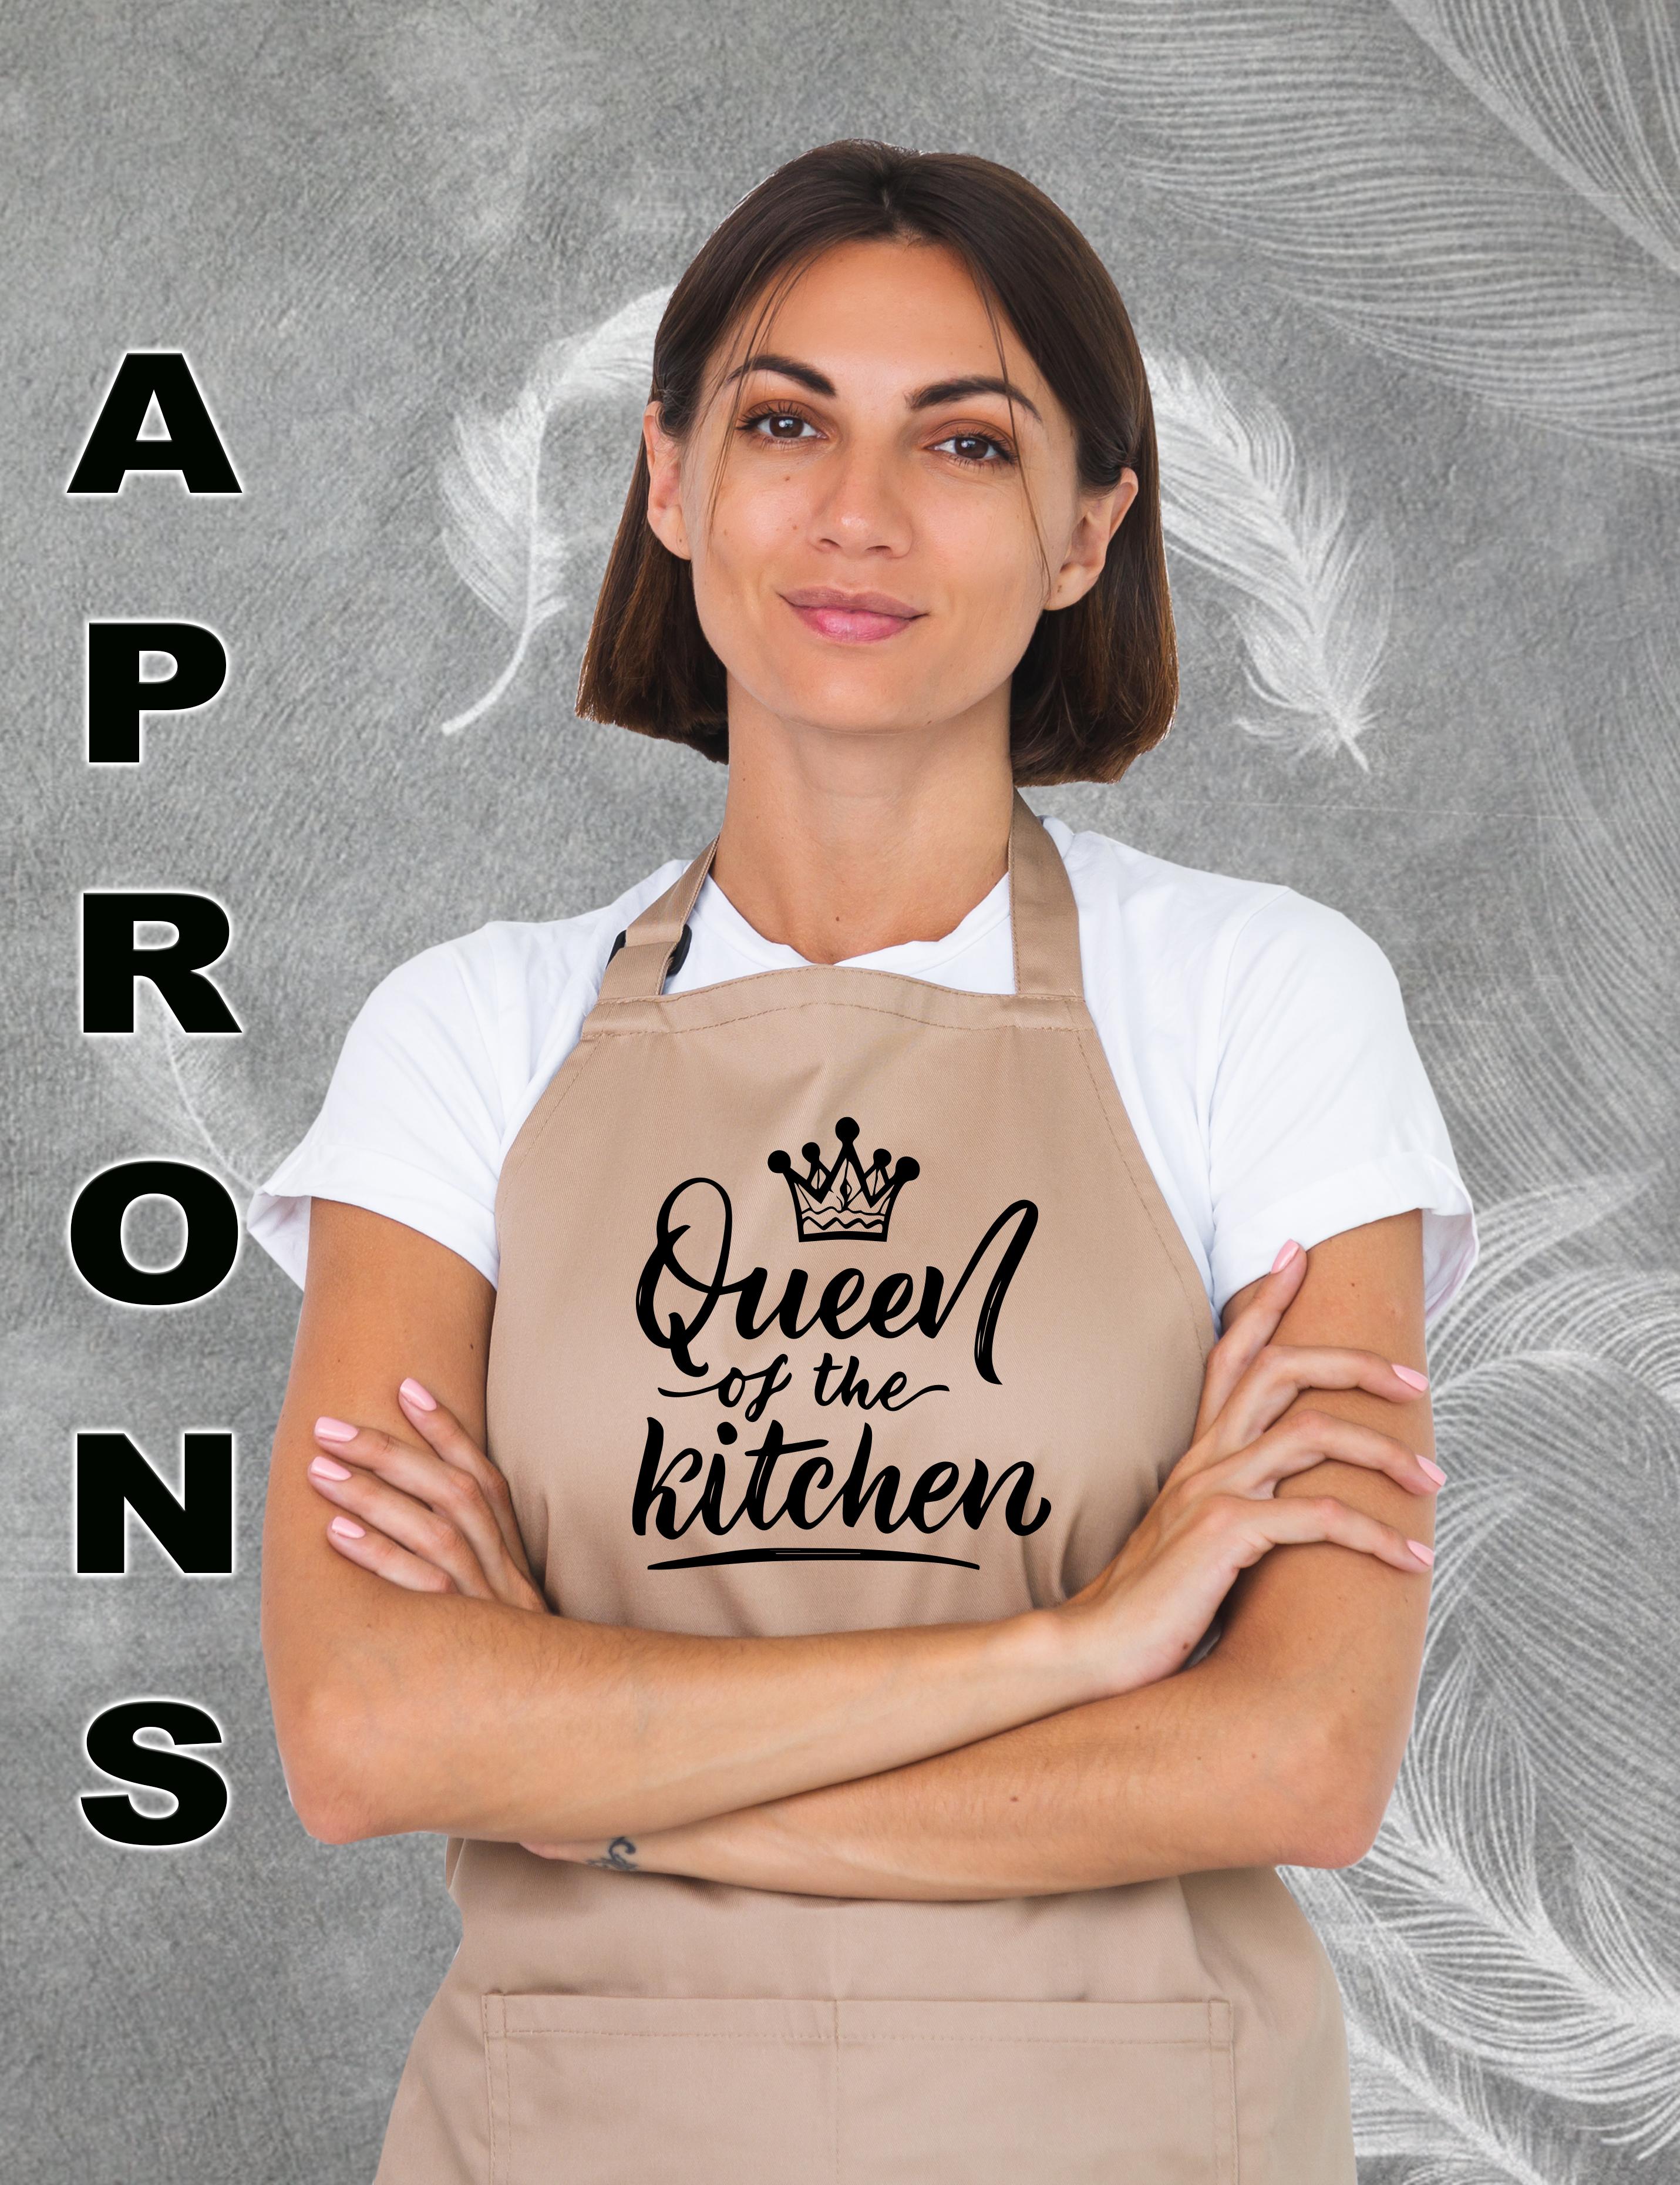 Personalised Apron, Customised Apron, Printed Apron, Embroidered Apron, Apron with Logo, Apron with Name, Apron with your Design